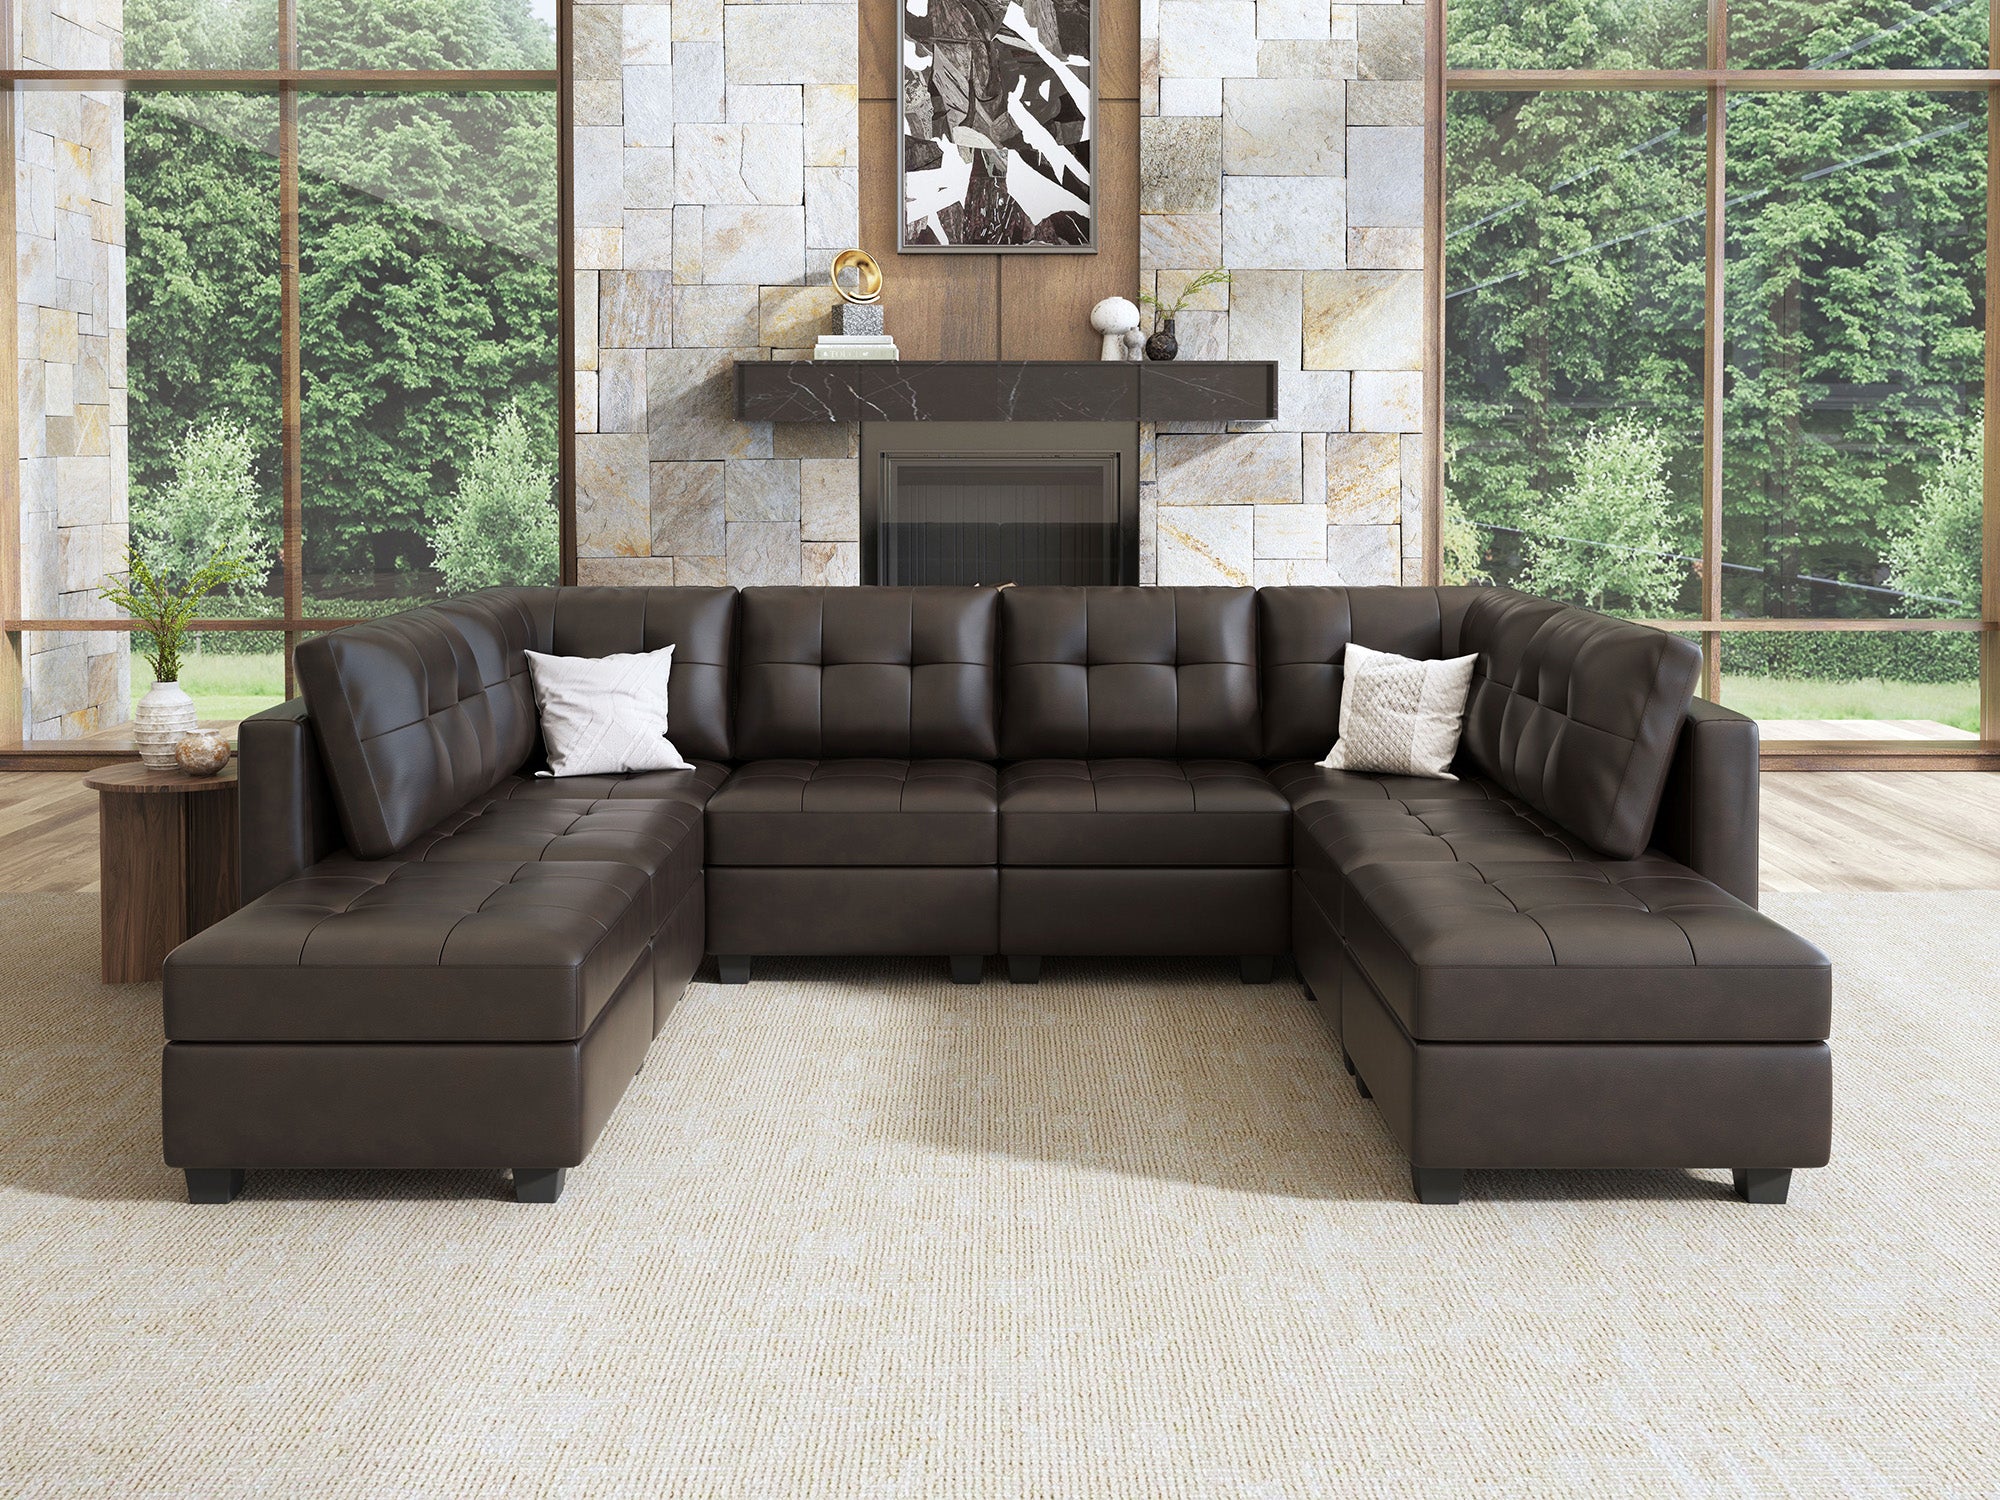 HONBAY 8-Piece Faux Leather Modular Sectional With Storage Seat